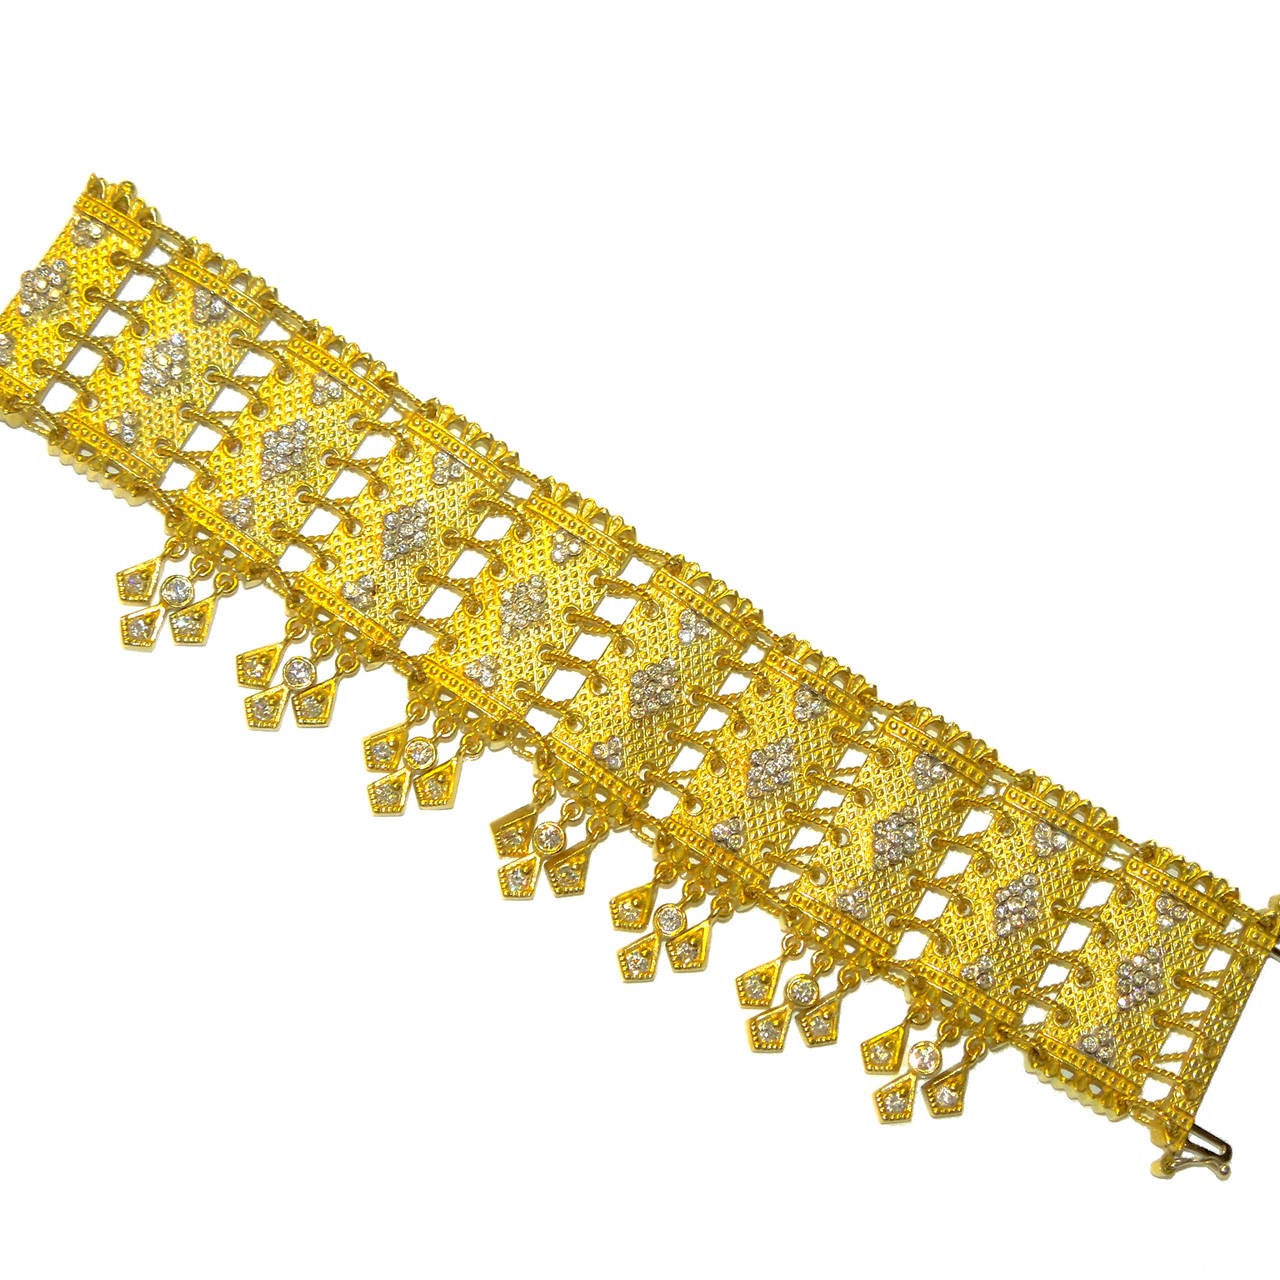 18K Gold Bracelet with Diamonds 

Hand twisted wires connects each part of this bracelet

Entire bracelet is put together by hand. Textured design is seen throughout the piece

Hanging diamonds below the bracelet

3.25 ct.'s of G Color, VS